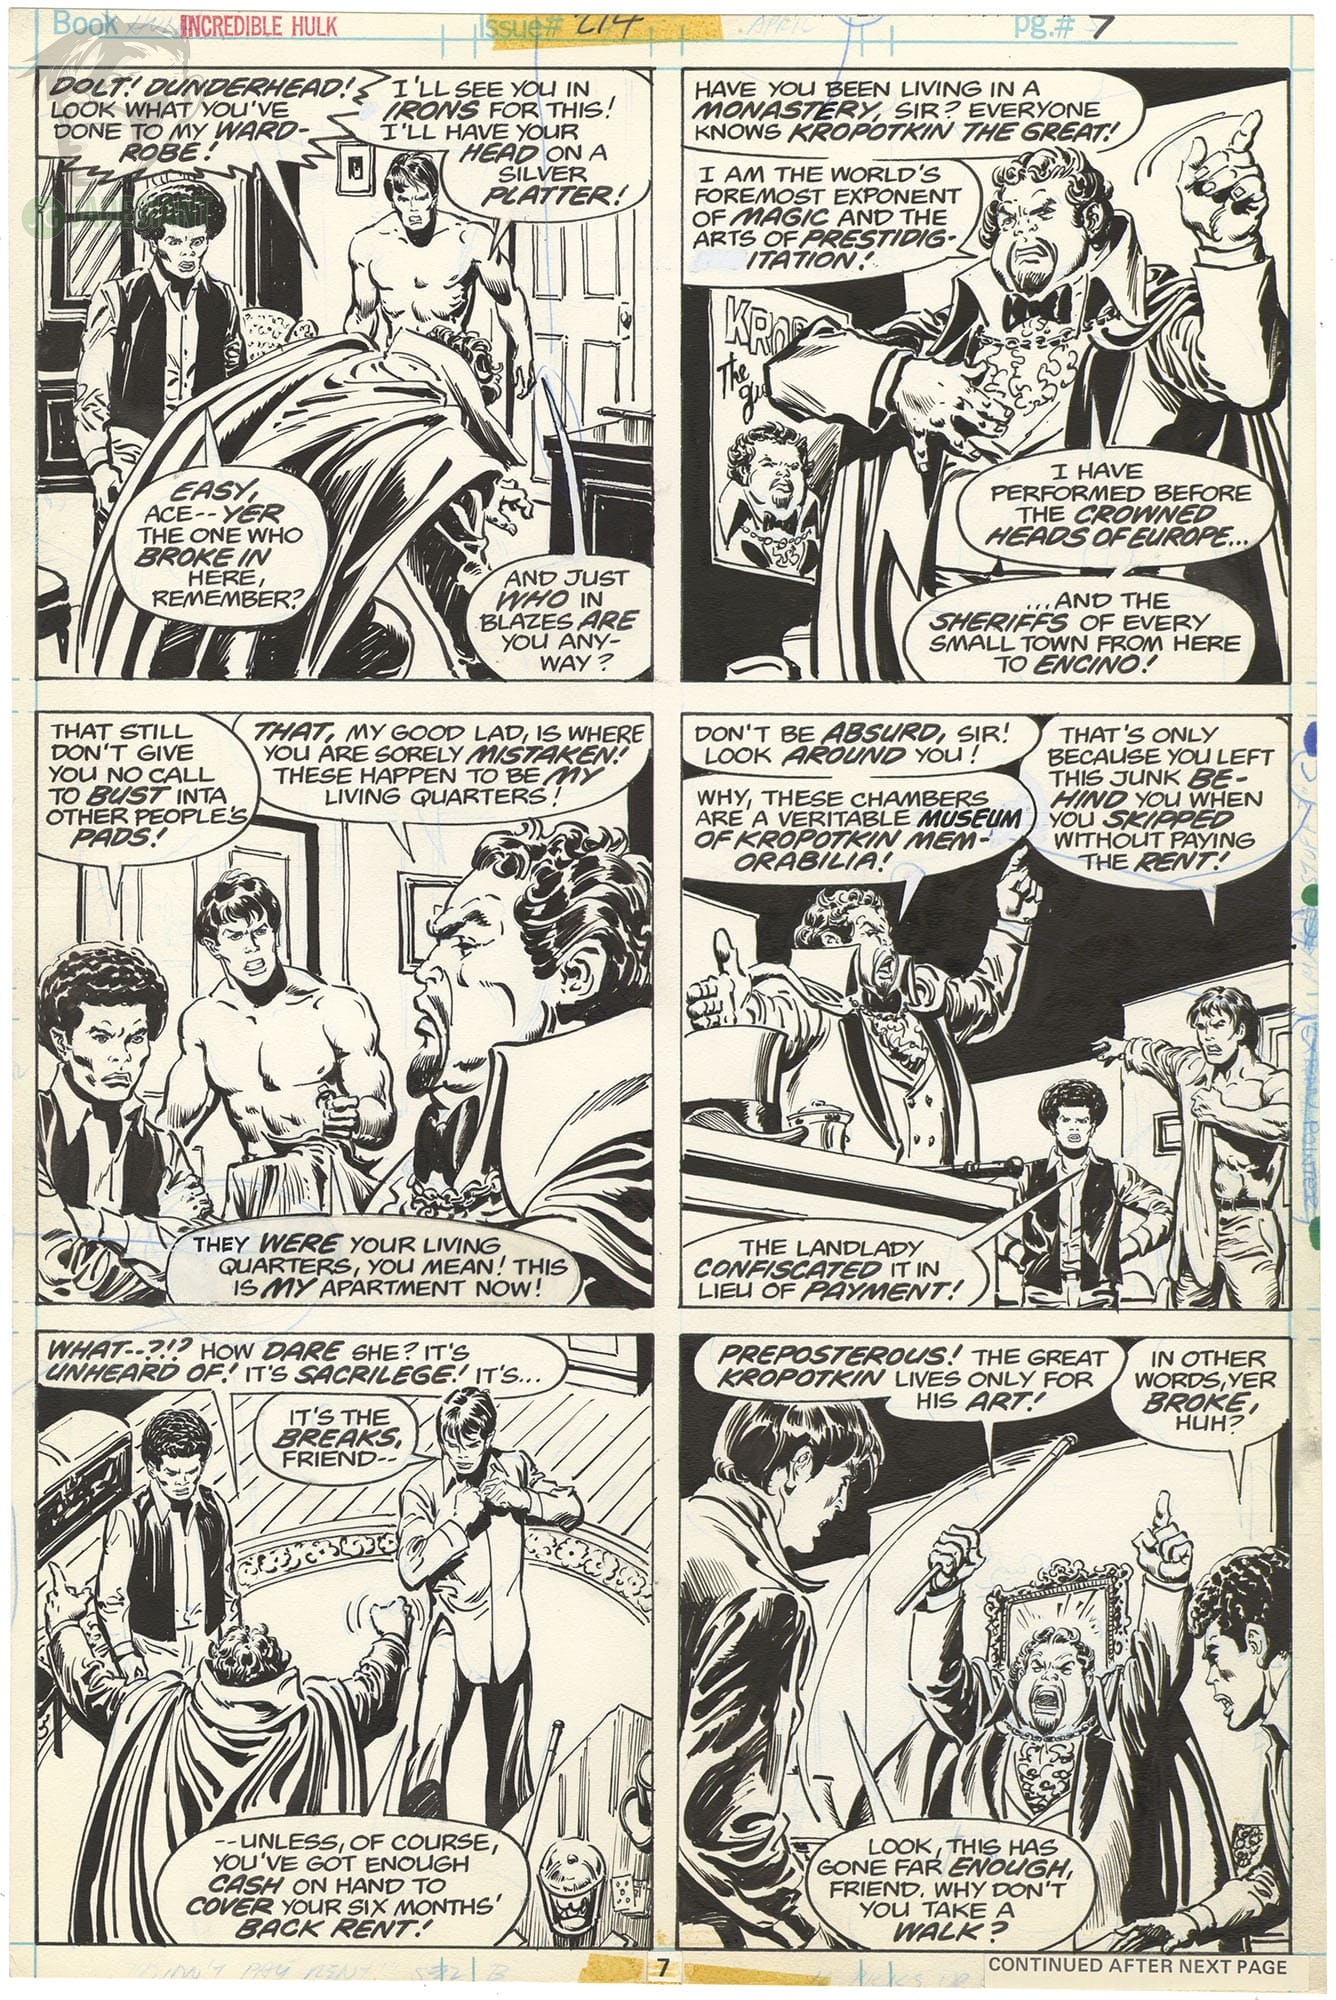 1977 Incredible Hulk 214 page 7 featuring Kropotkin the Great by Sal Buscema and Ernie Chan Comic Art